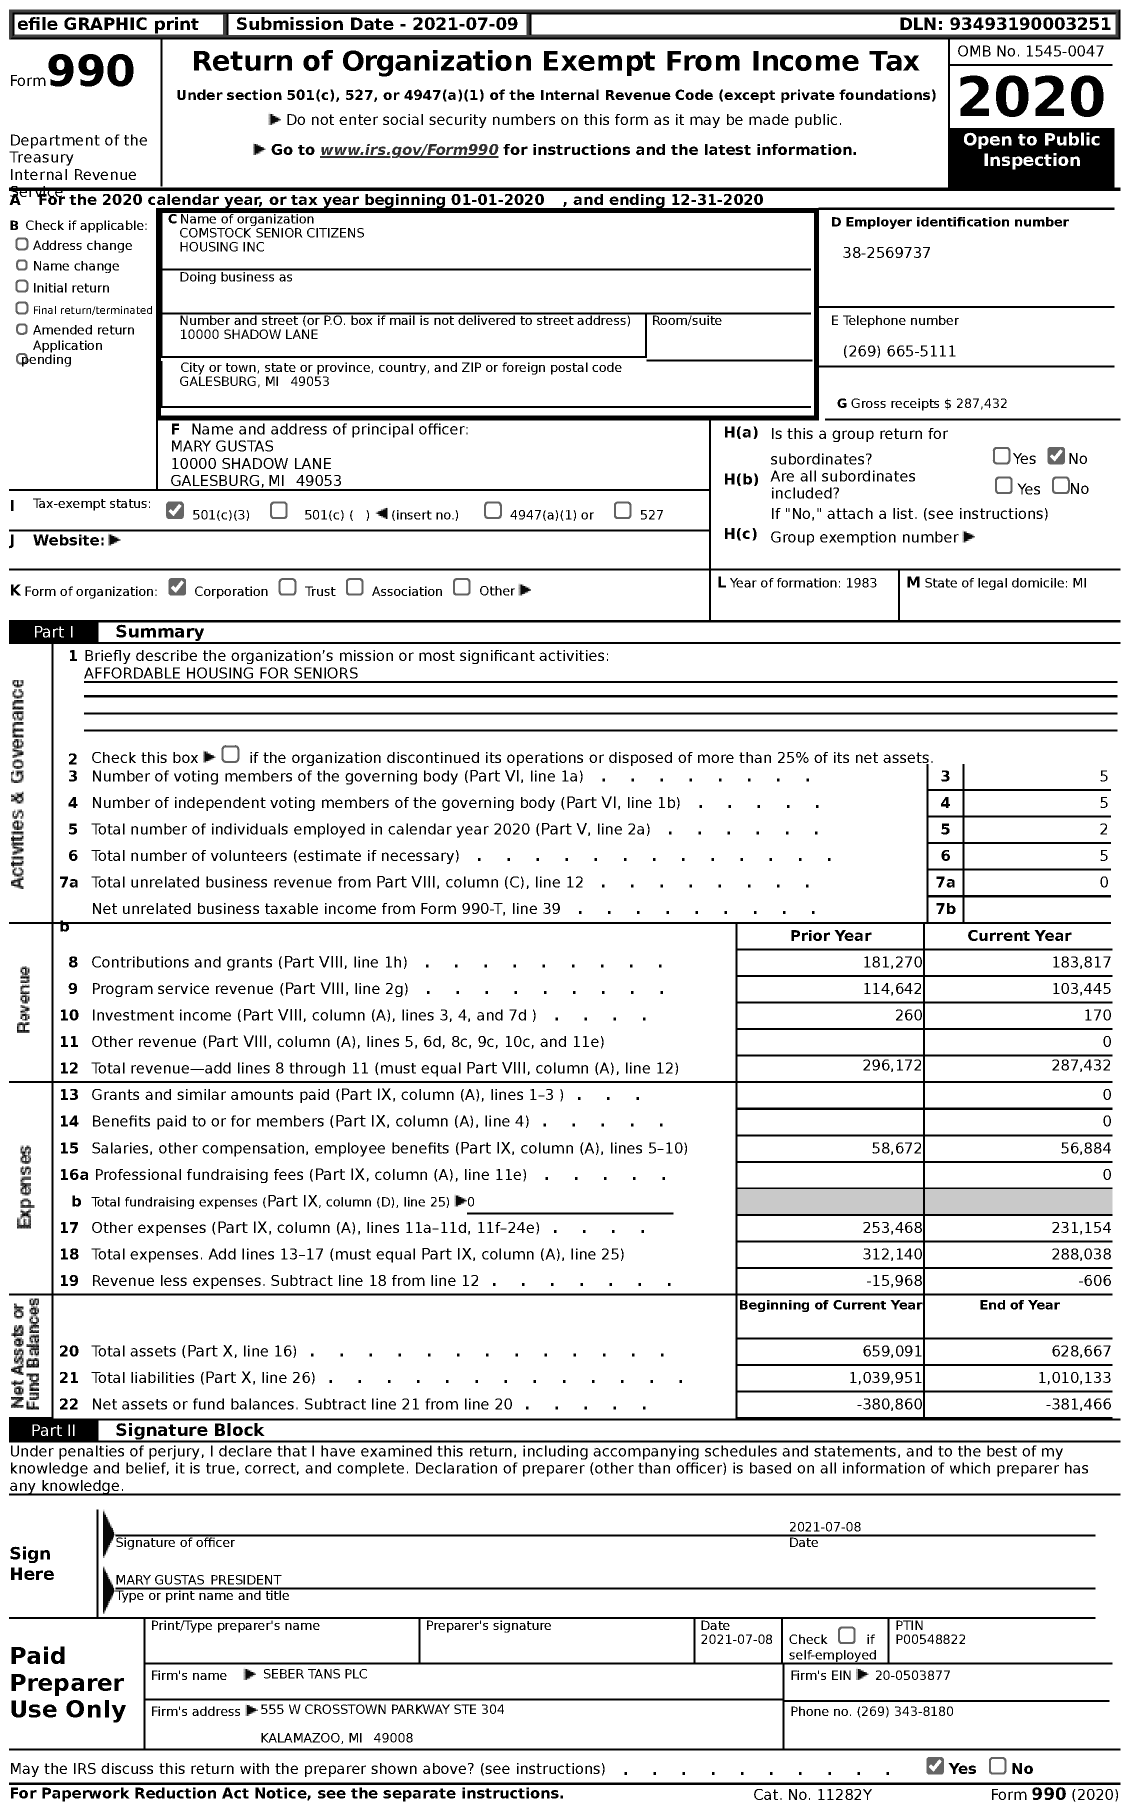 Image of first page of 2020 Form 990 for Comstock Senior Citizens Housing